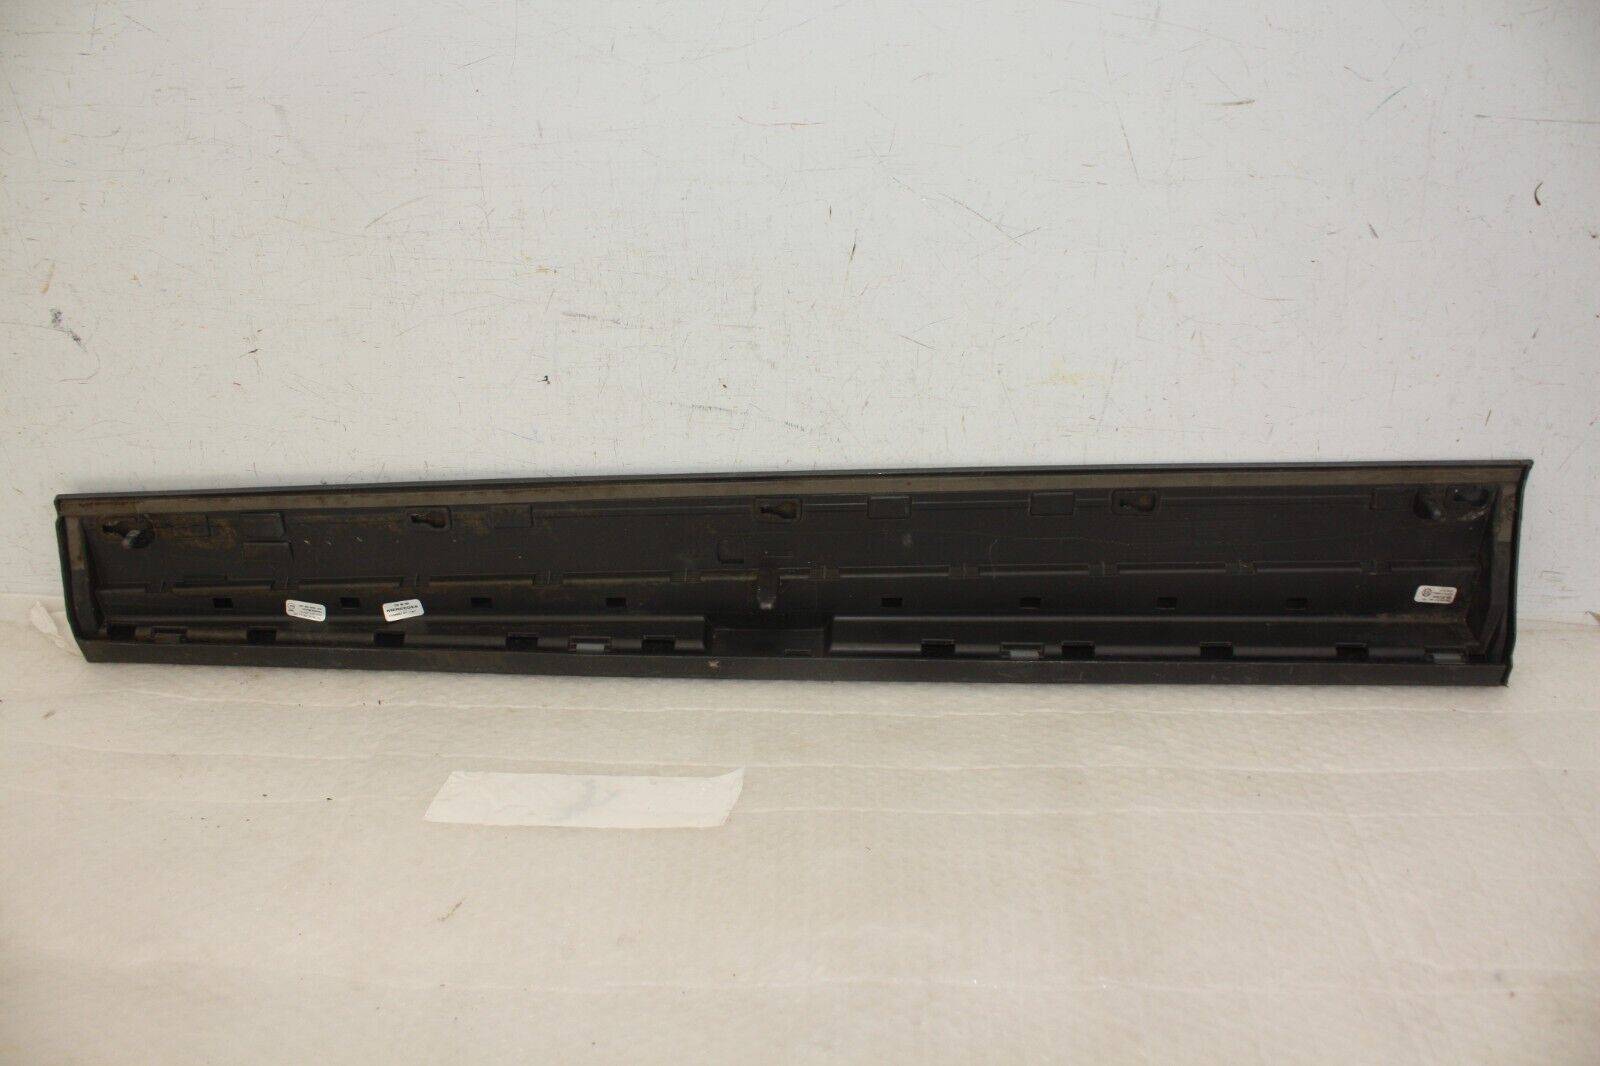 Audi-Q5-S-Line-Front-Right-Door-Moulding-2017-TO-2020-80A853960B-Genuine-176328460553-8